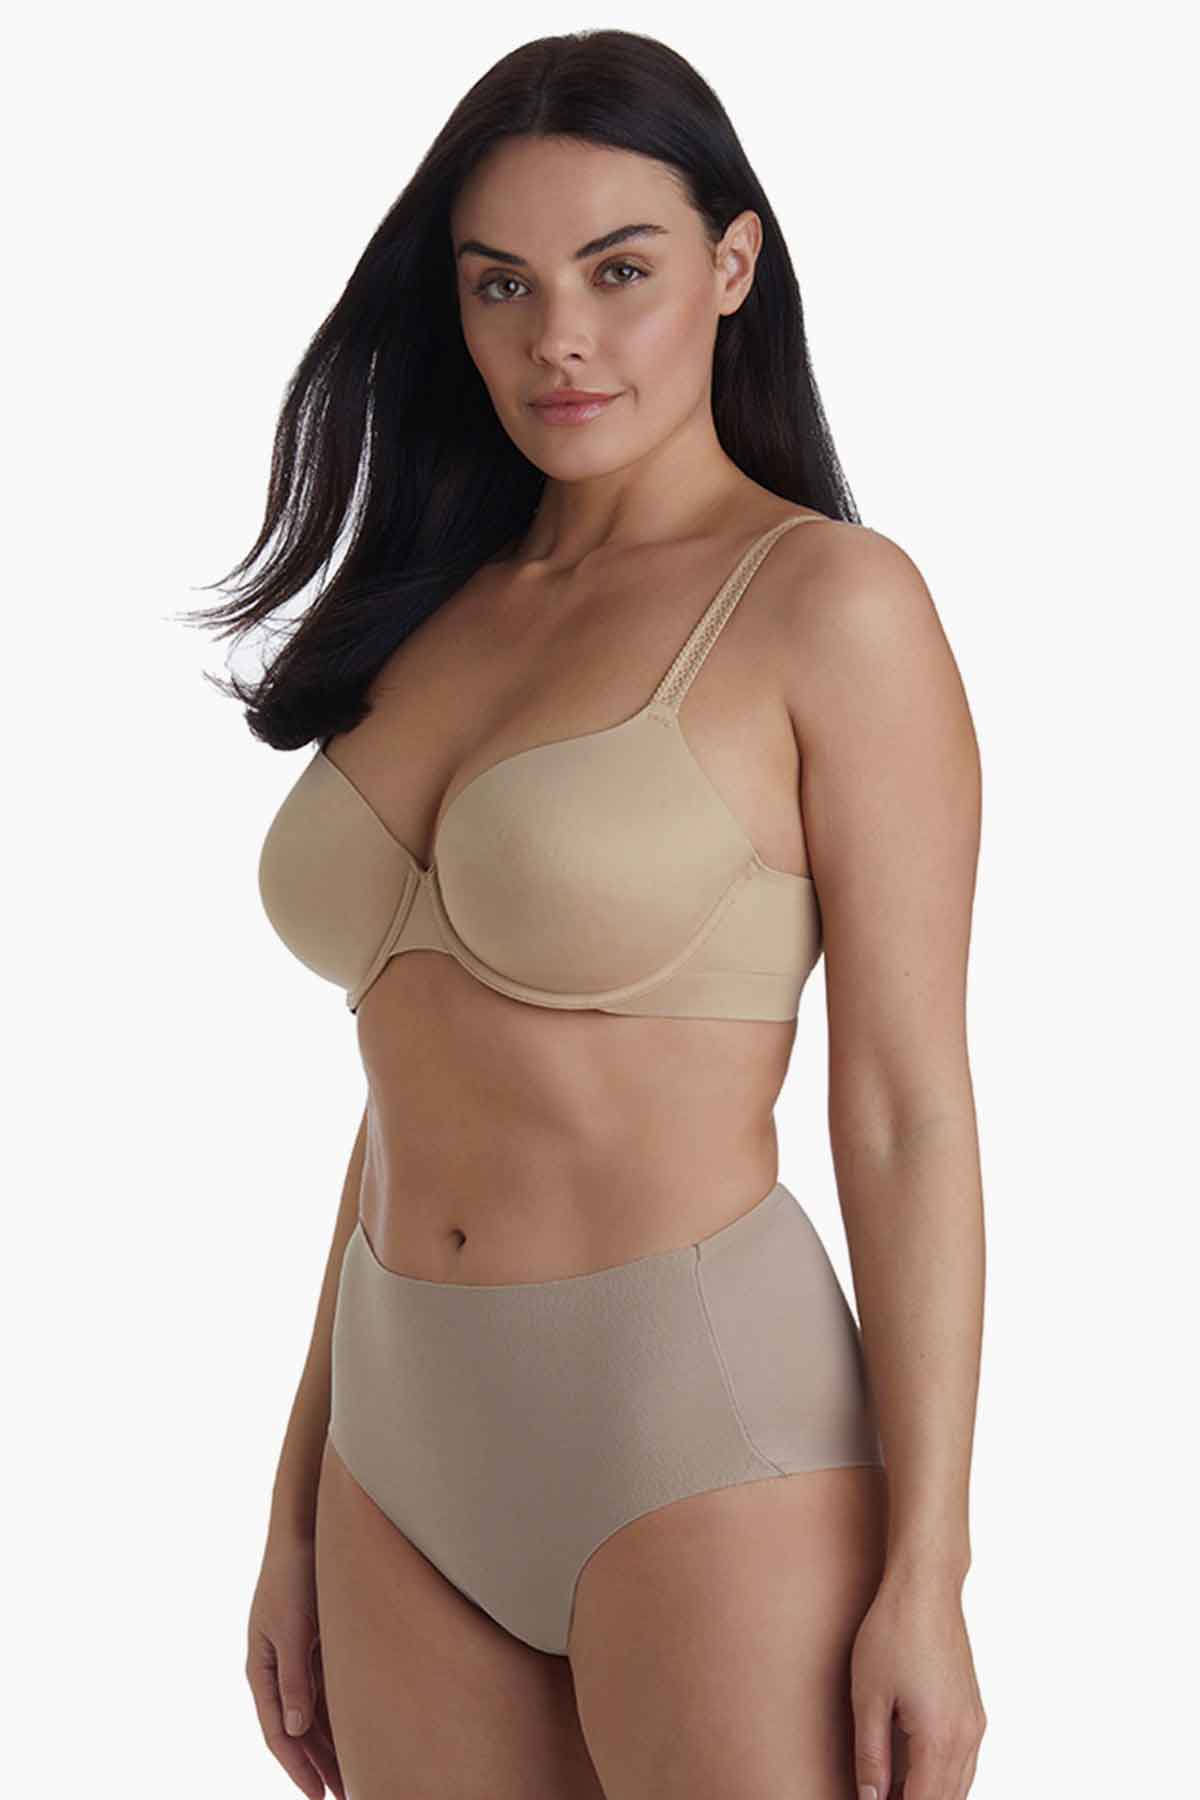 Miraclesuit Shapewear Solids High Waist Brief